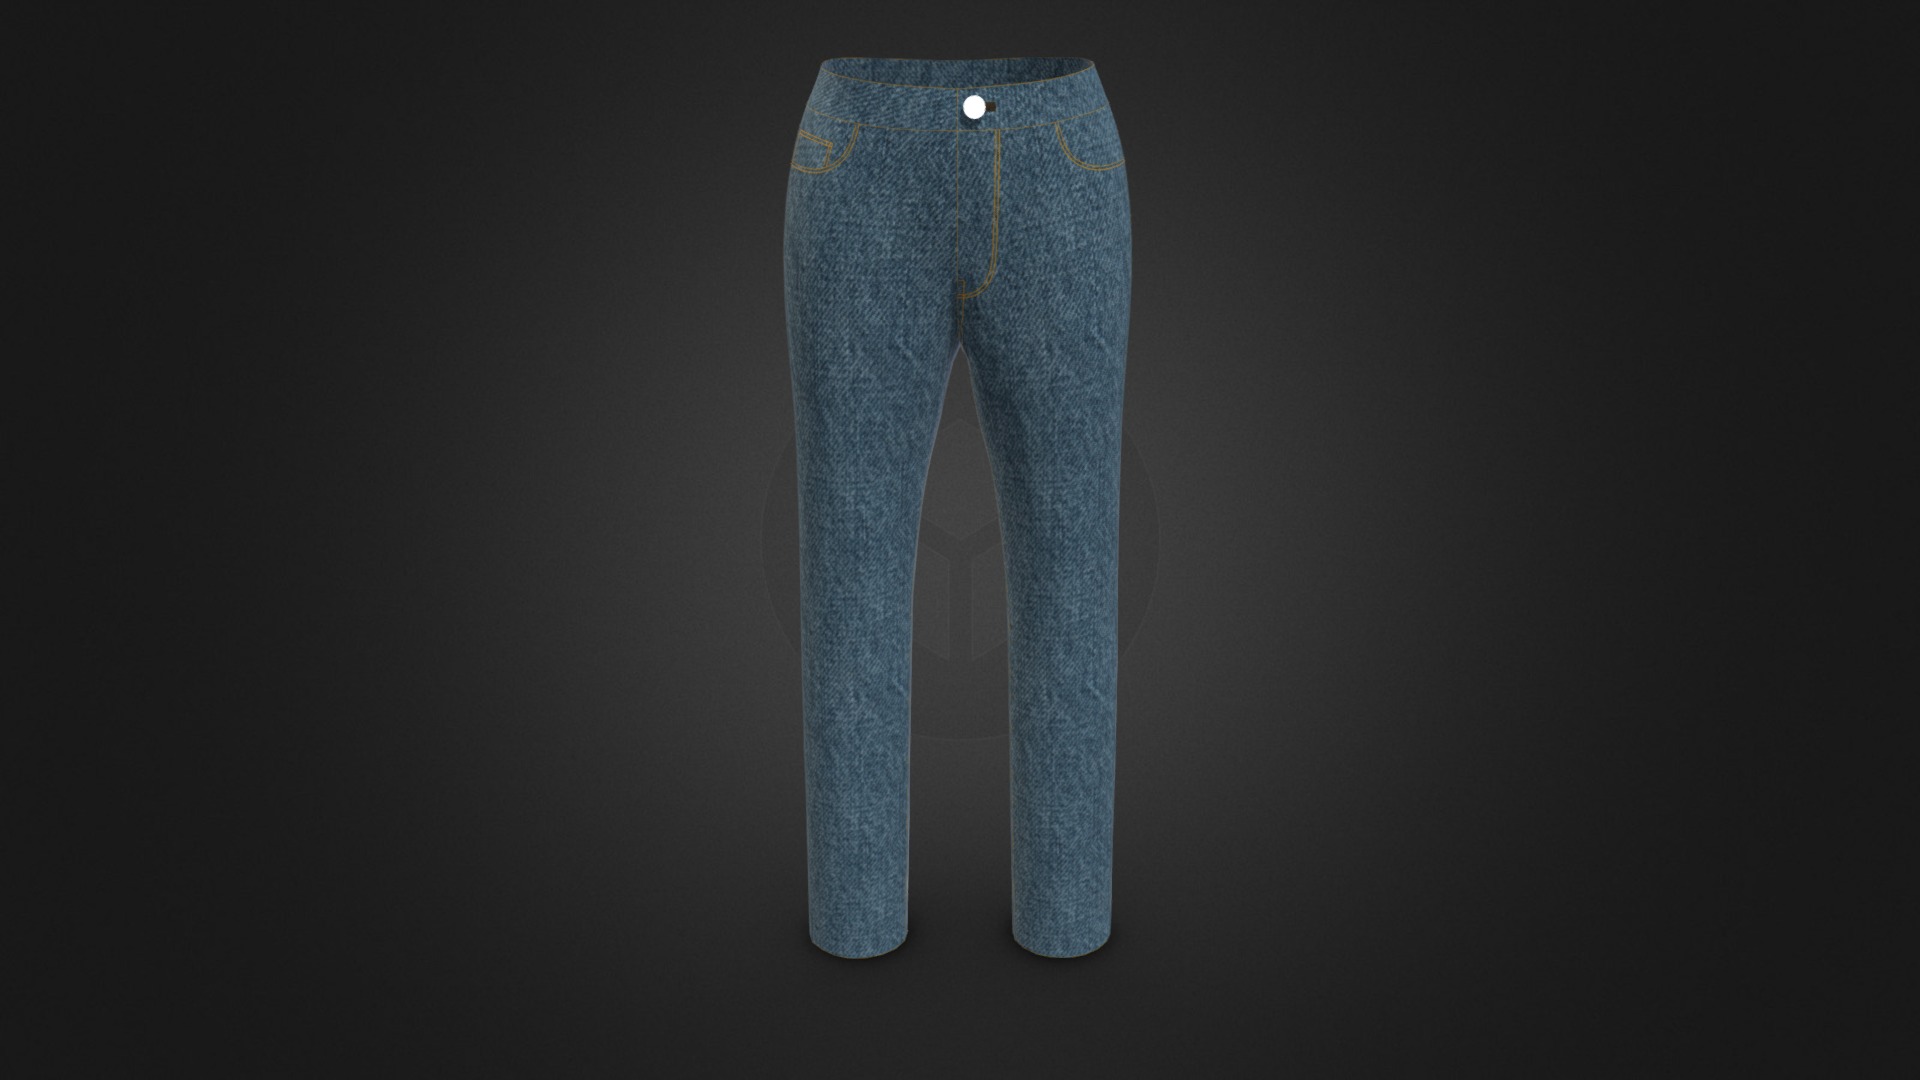 3D model Washing denim Blue jeans - This is a 3D model of the Washing denim Blue jeans. The 3D model is about a pair of blue jeans.